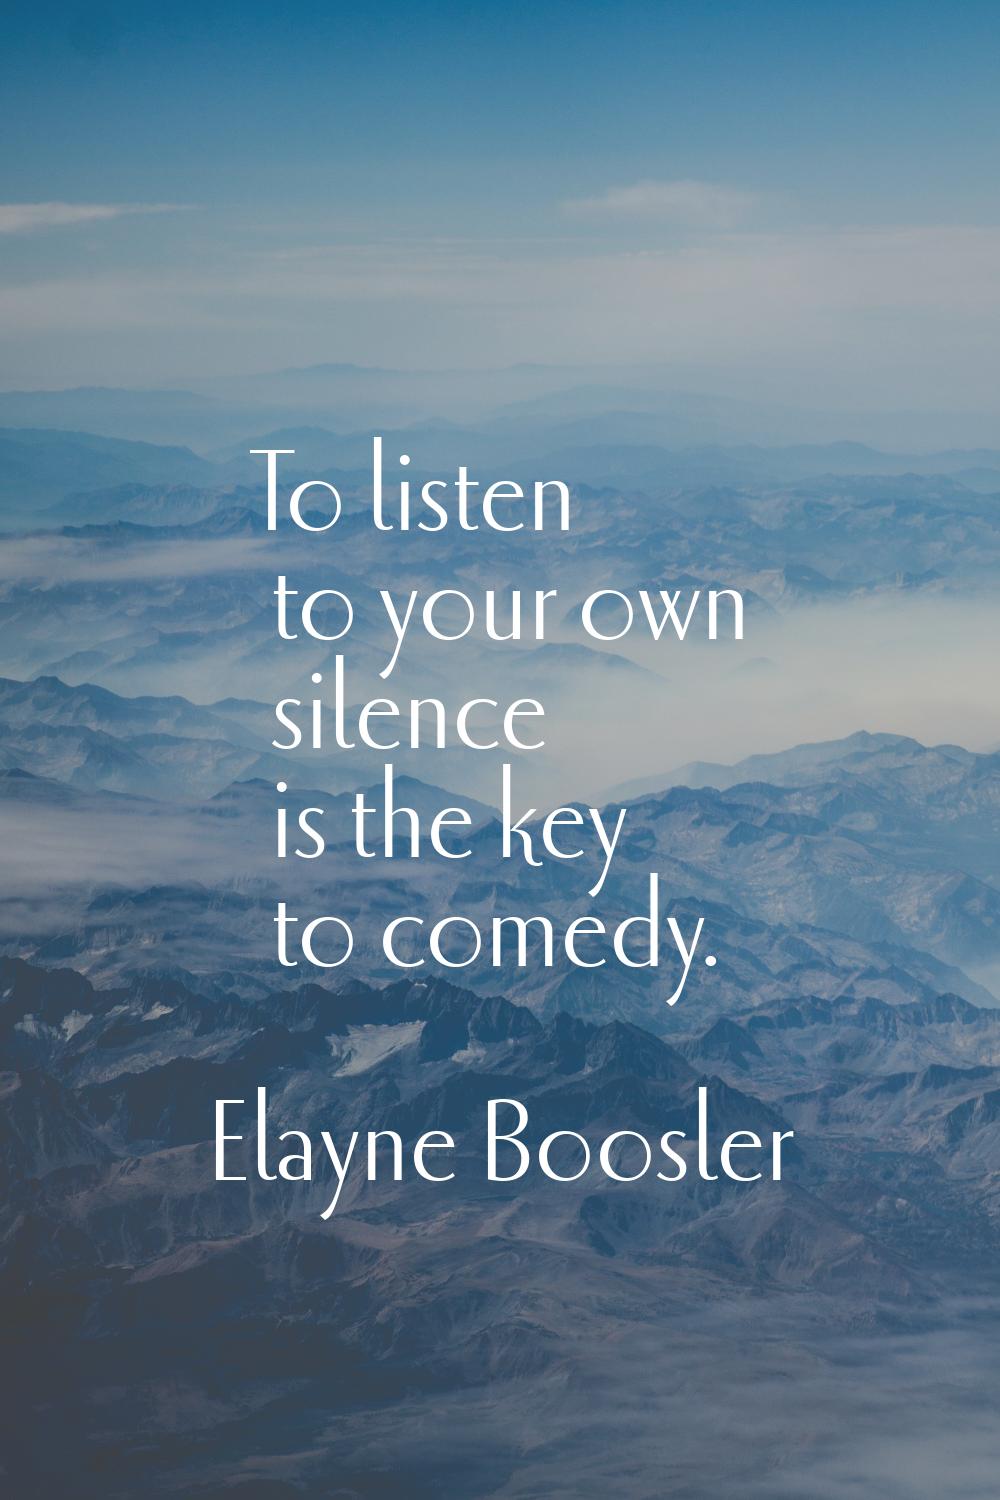 To listen to your own silence is the key to comedy.